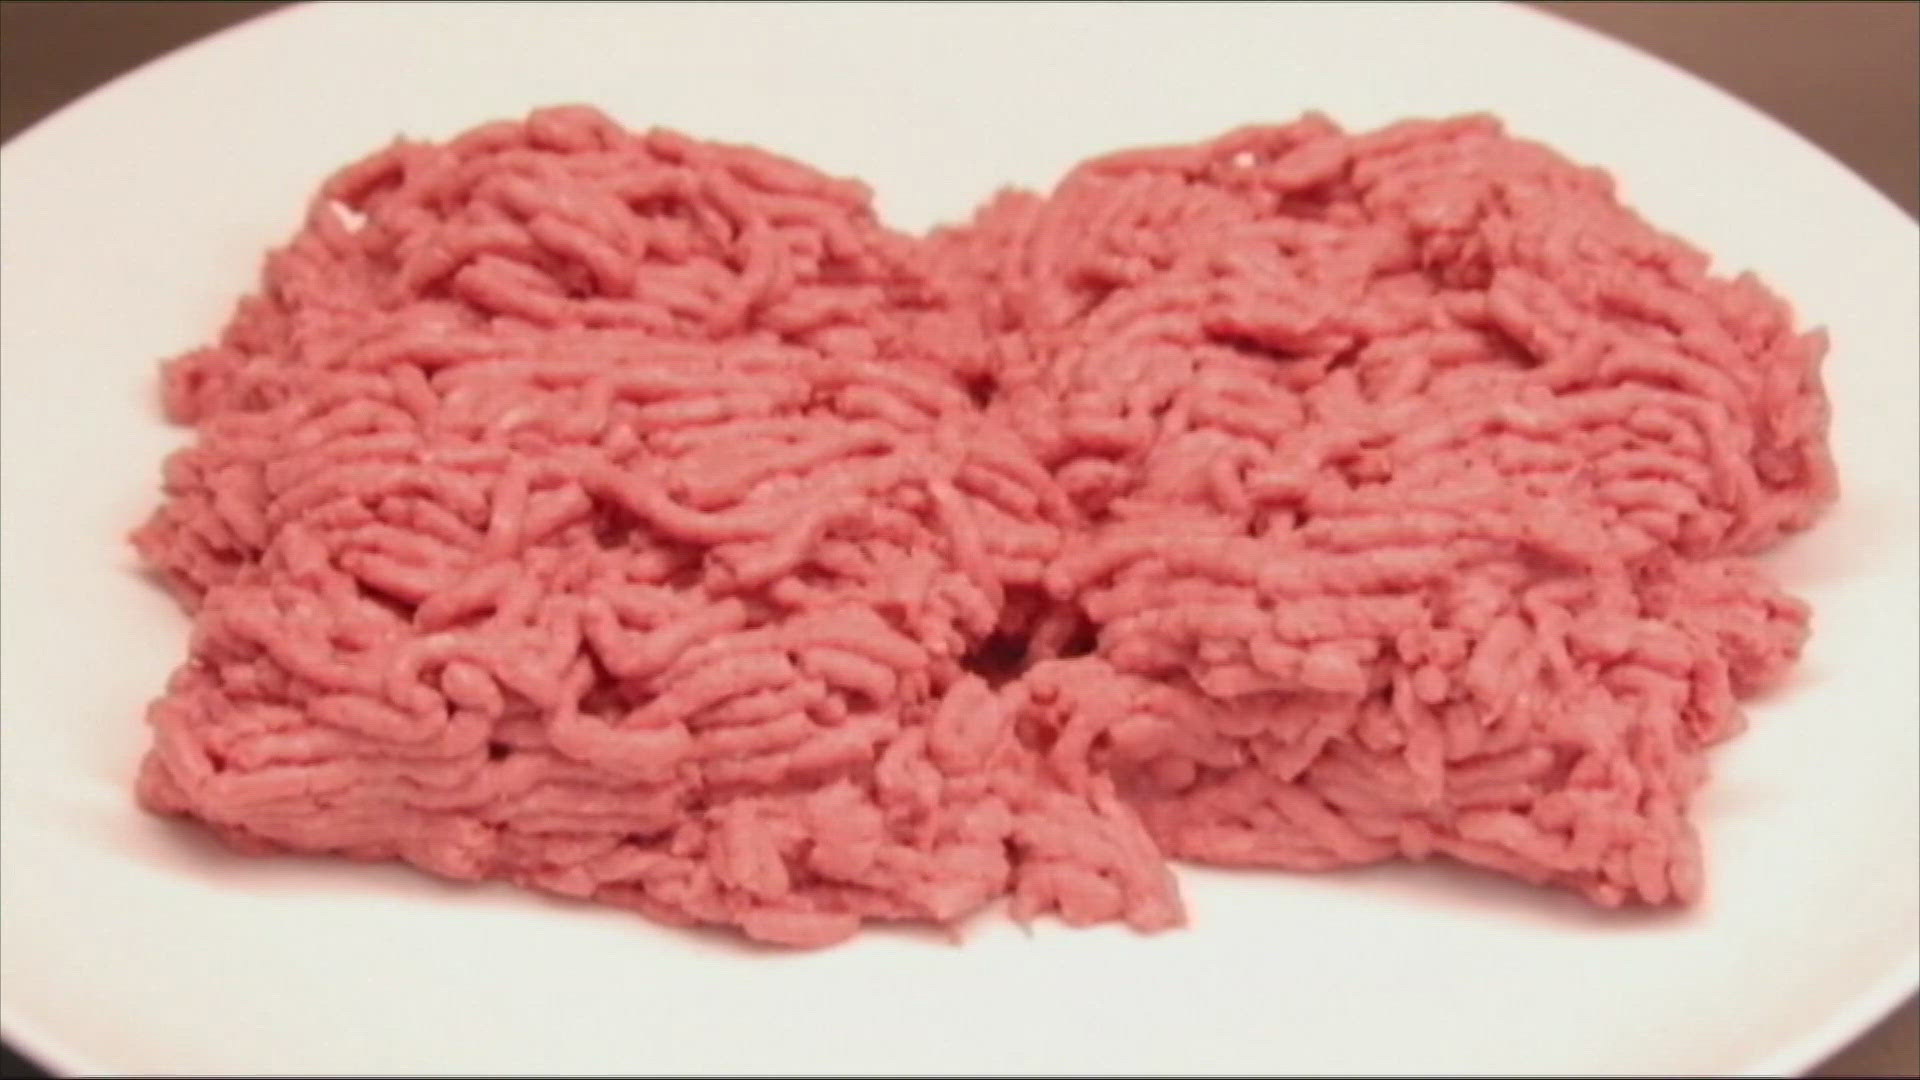 The U.S. Department of Agriculture has recalled ground beef sold at Walmart locations across the country over possible contamination risk of E. coli.